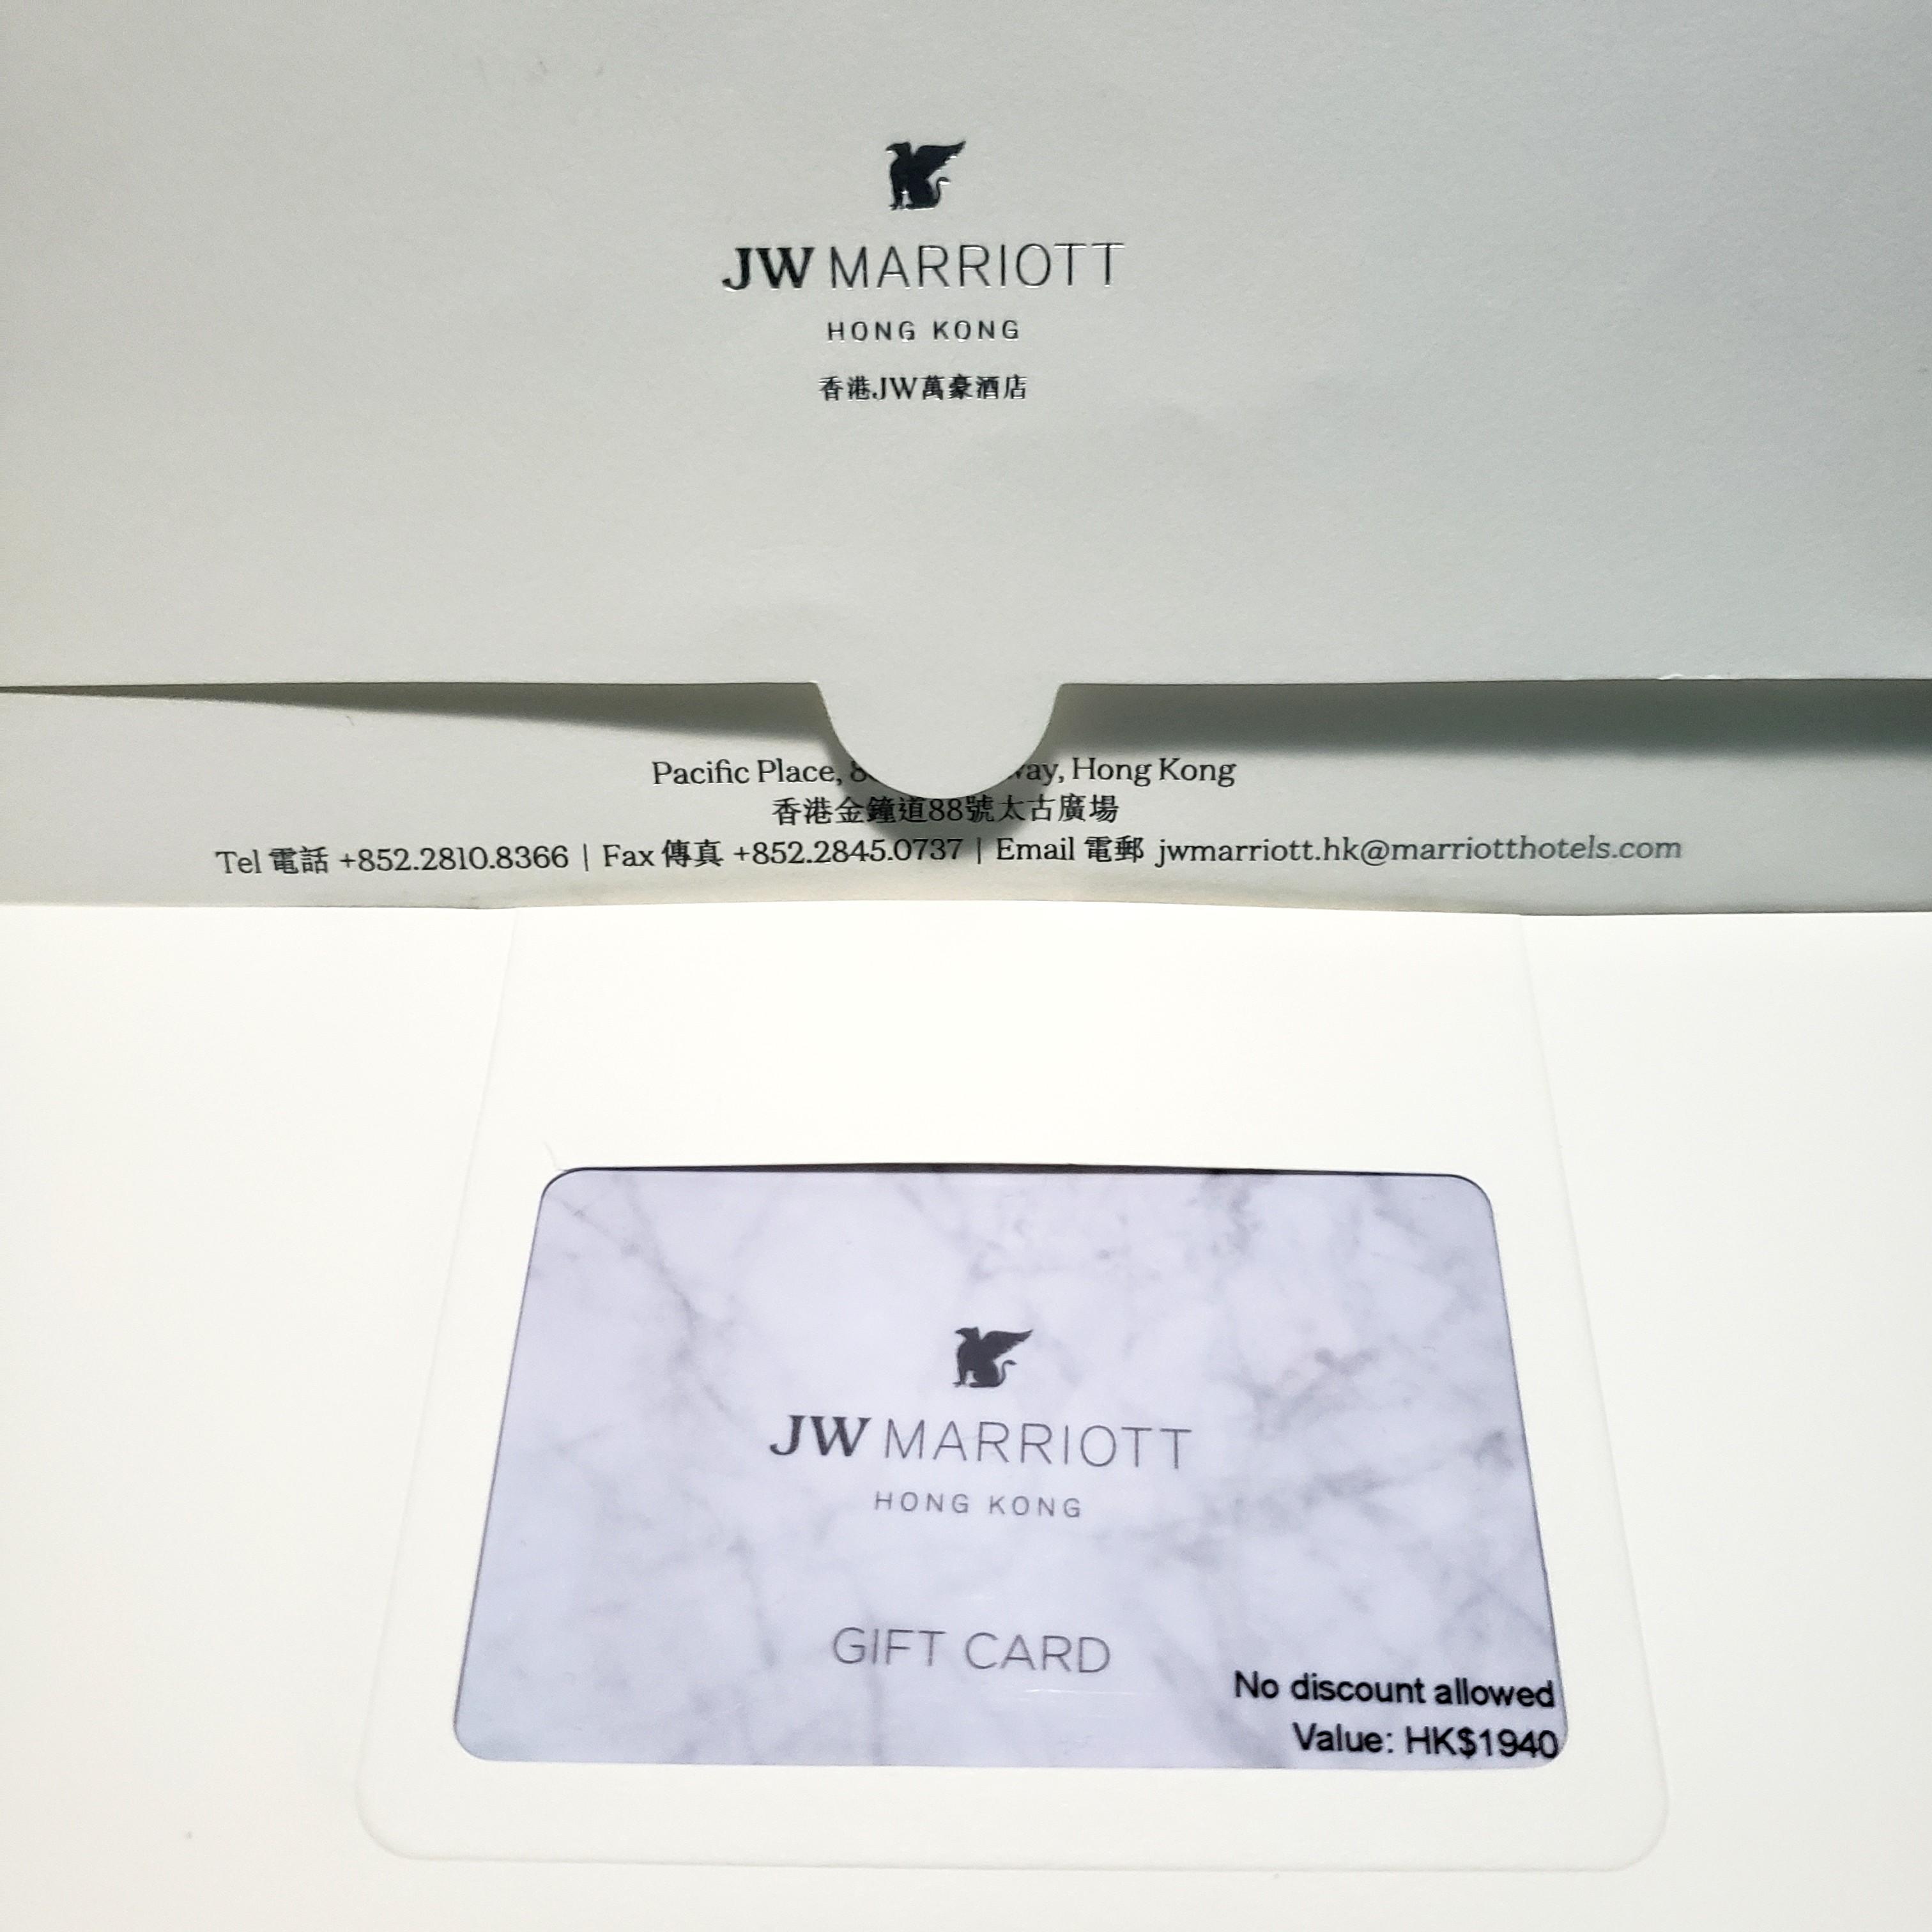 $50 Marriott Gift Cards for $40 - 20% Off! - Running with Miles